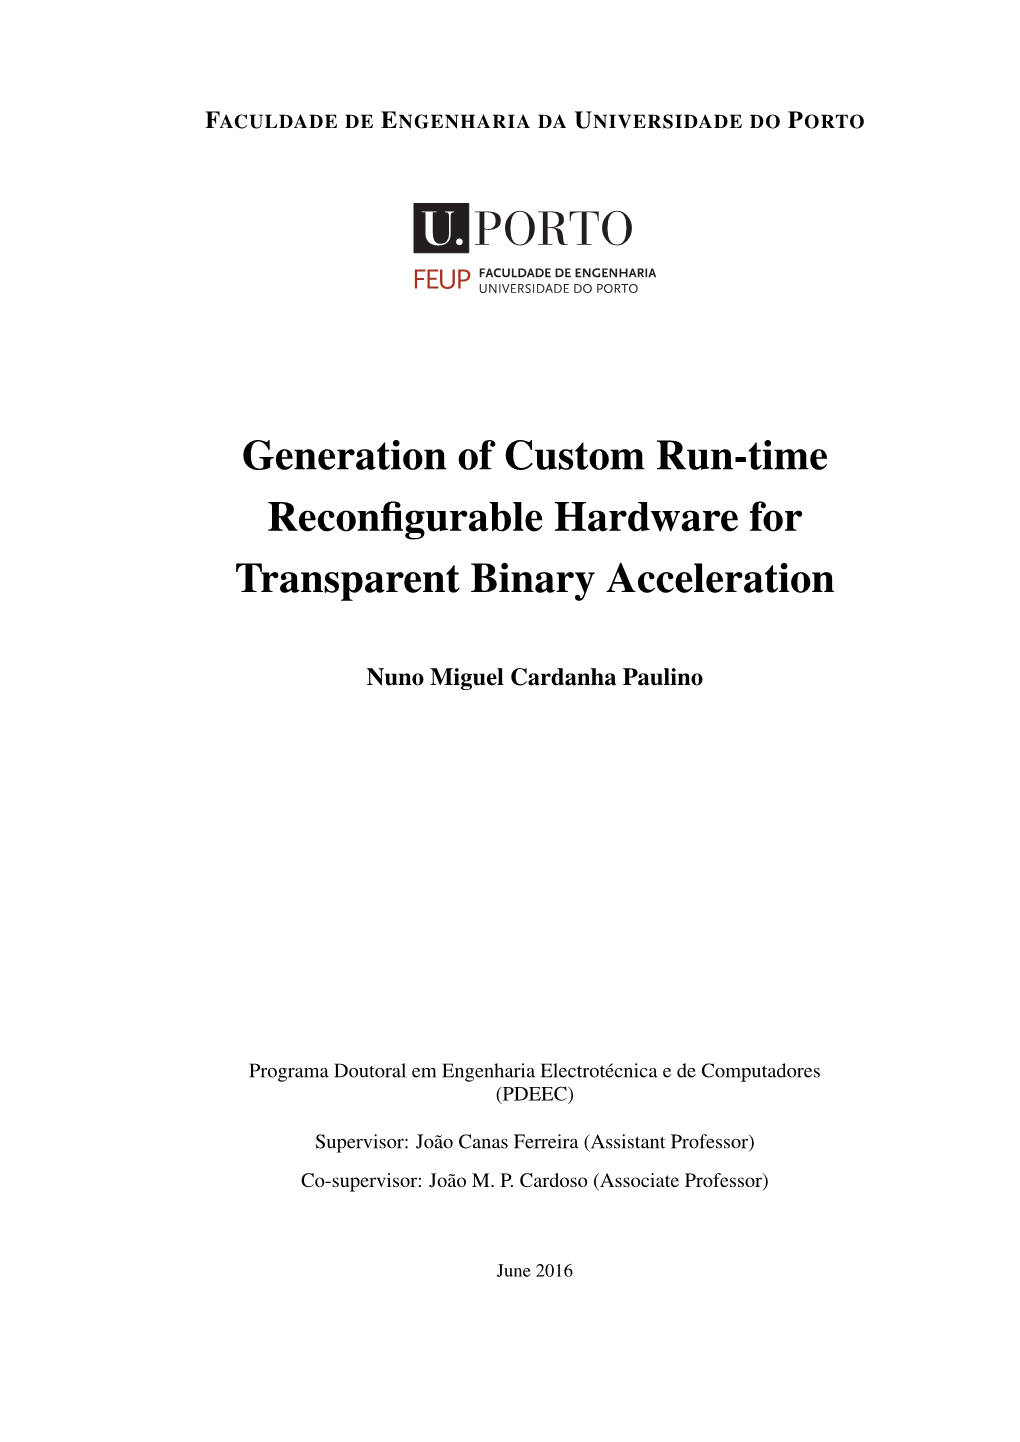 Generation of Custom Run-Time Reconfigurable Hardware For